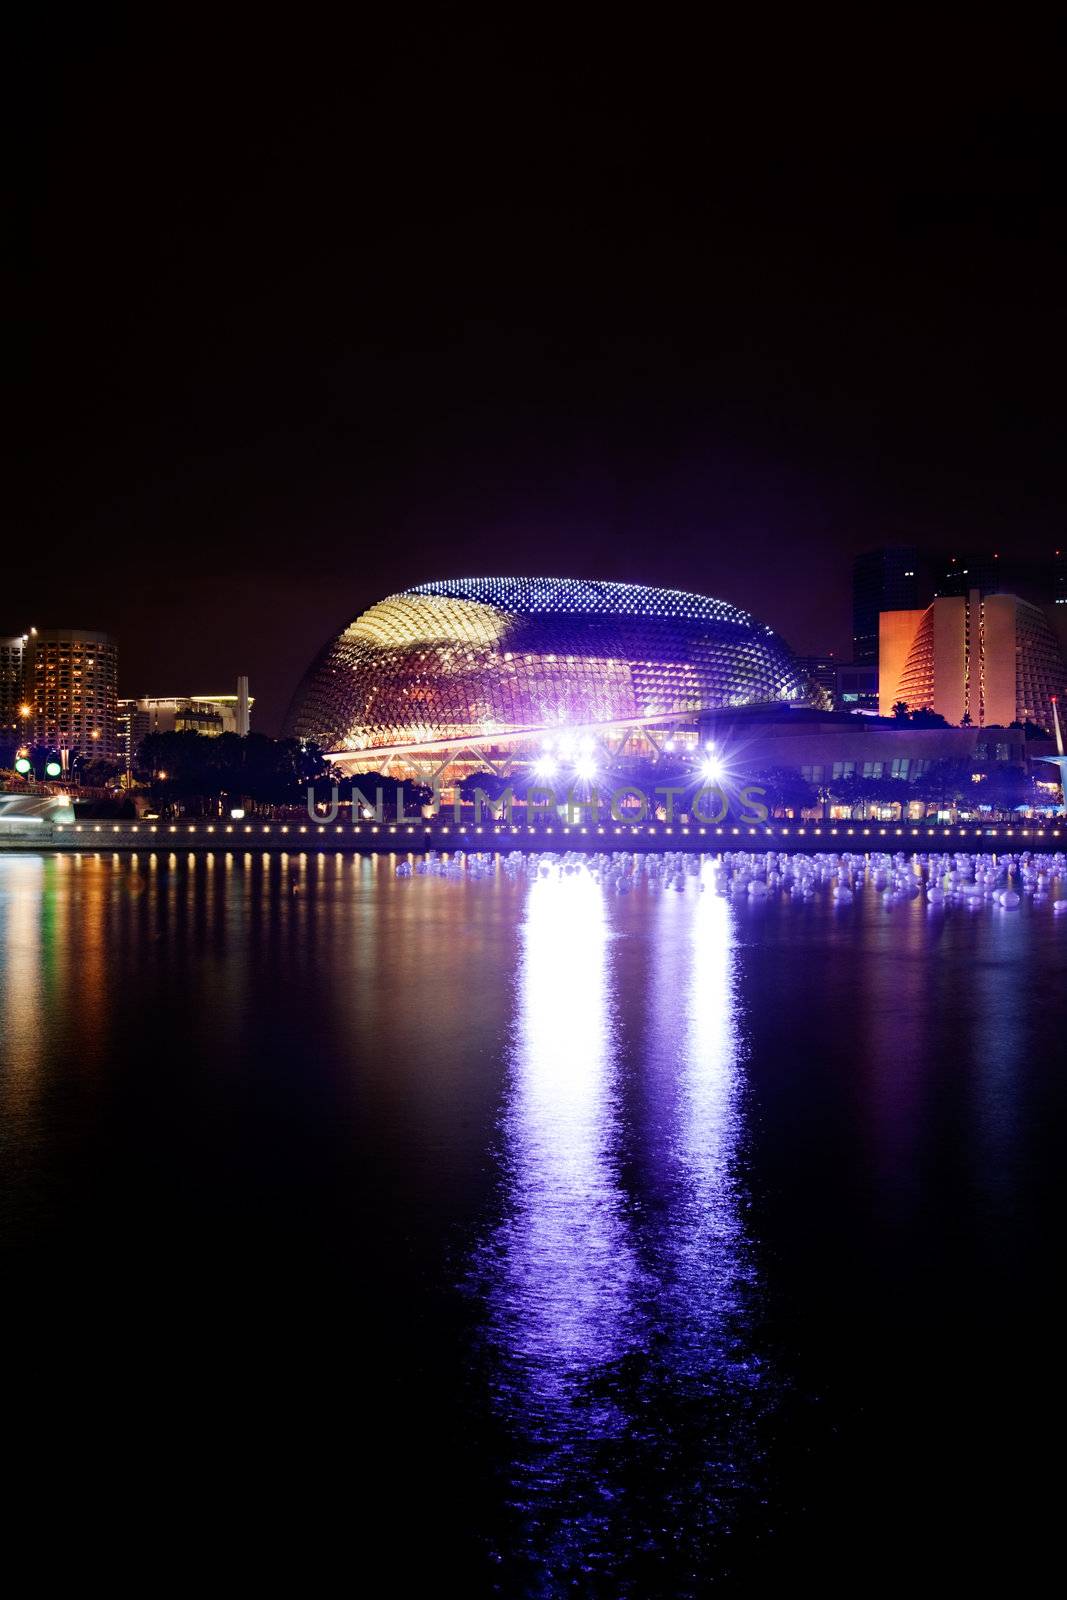 The Esplanade in Singapore on the river